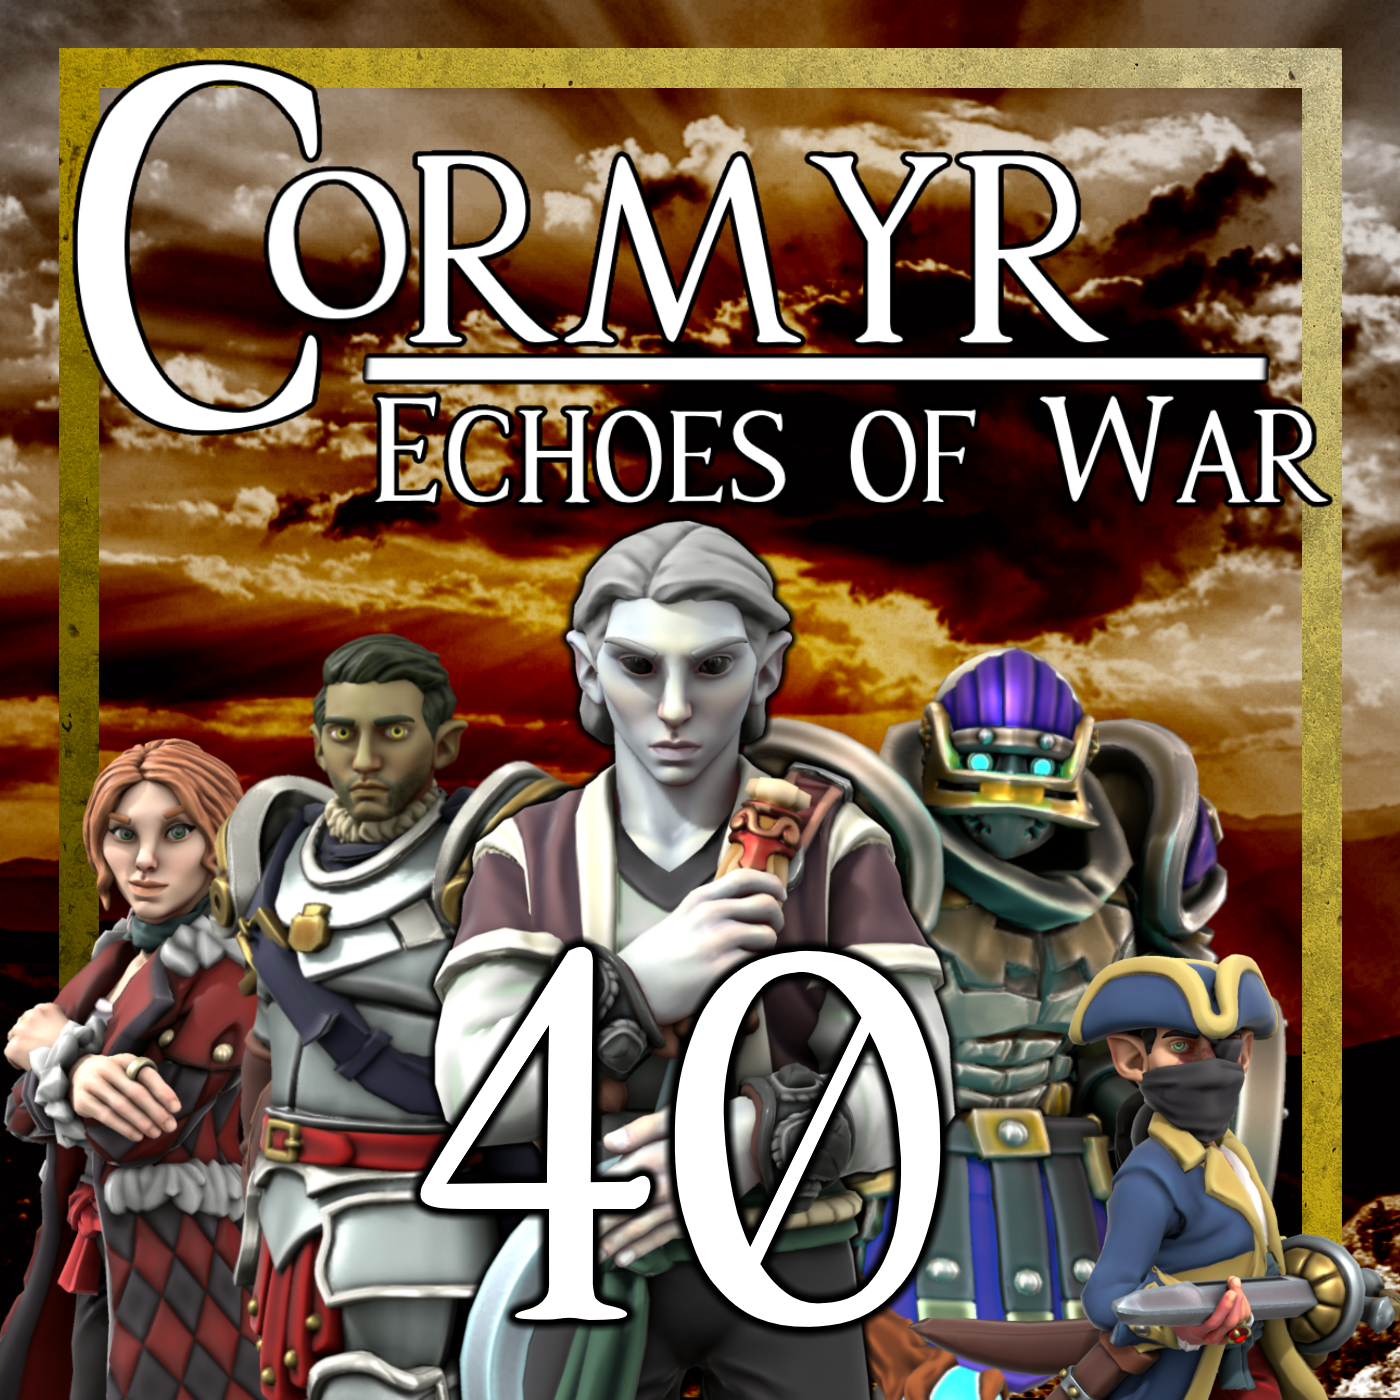 Cormyr: Echoes of War - Ep. 40 - World of Darkness